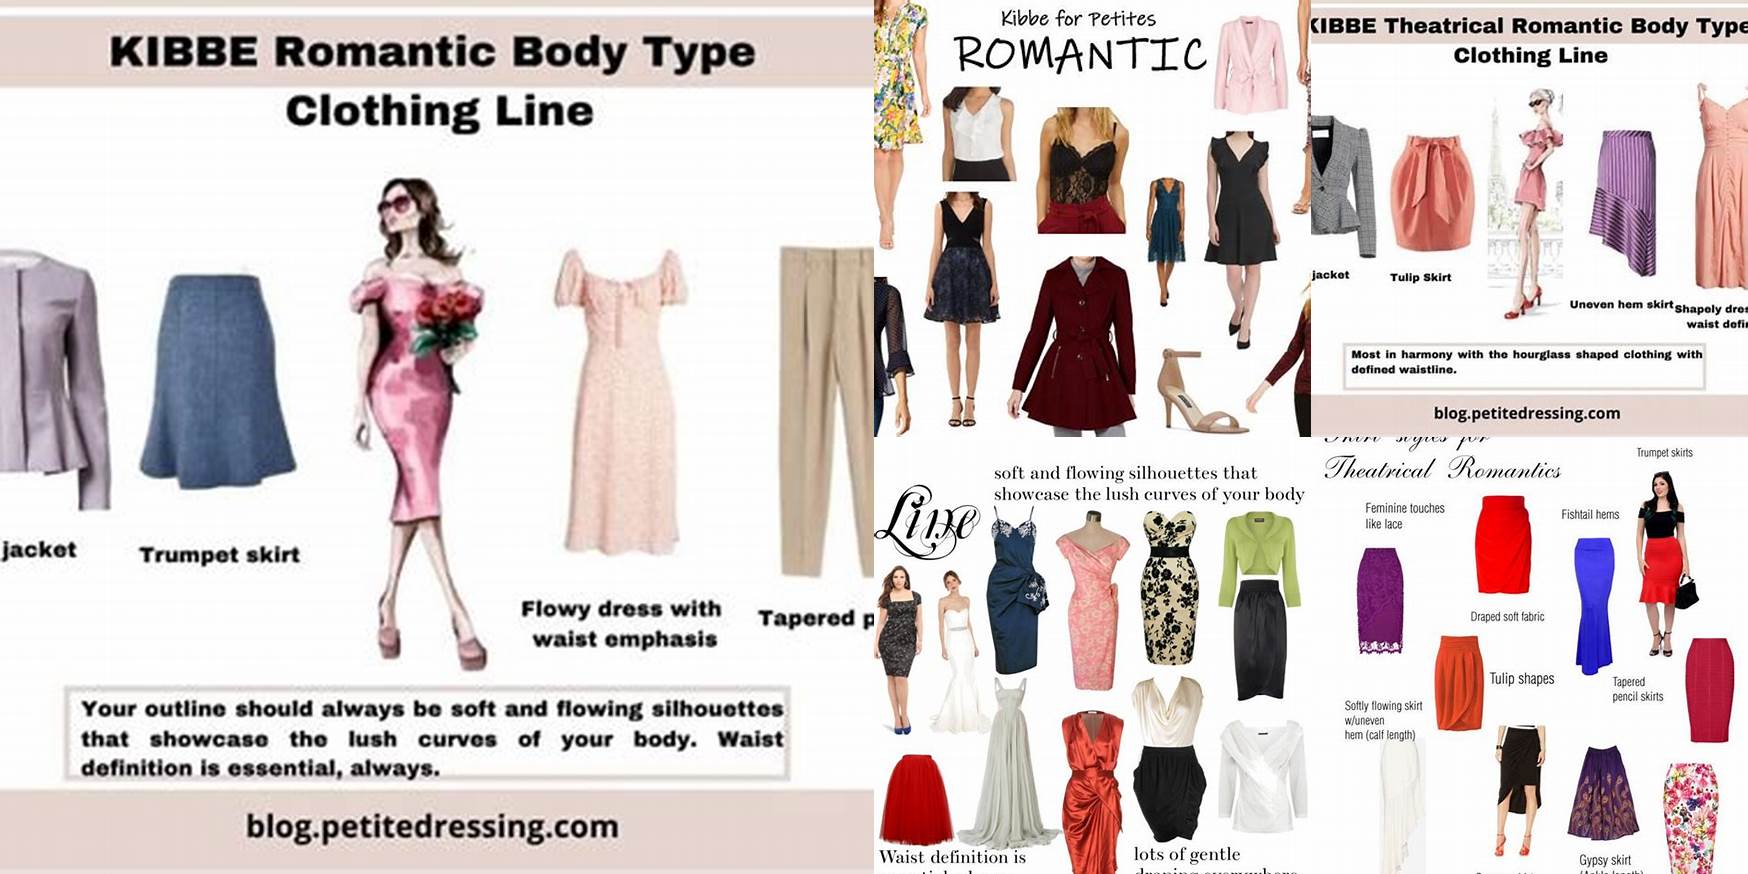 How To Dress For Romantic Body Type